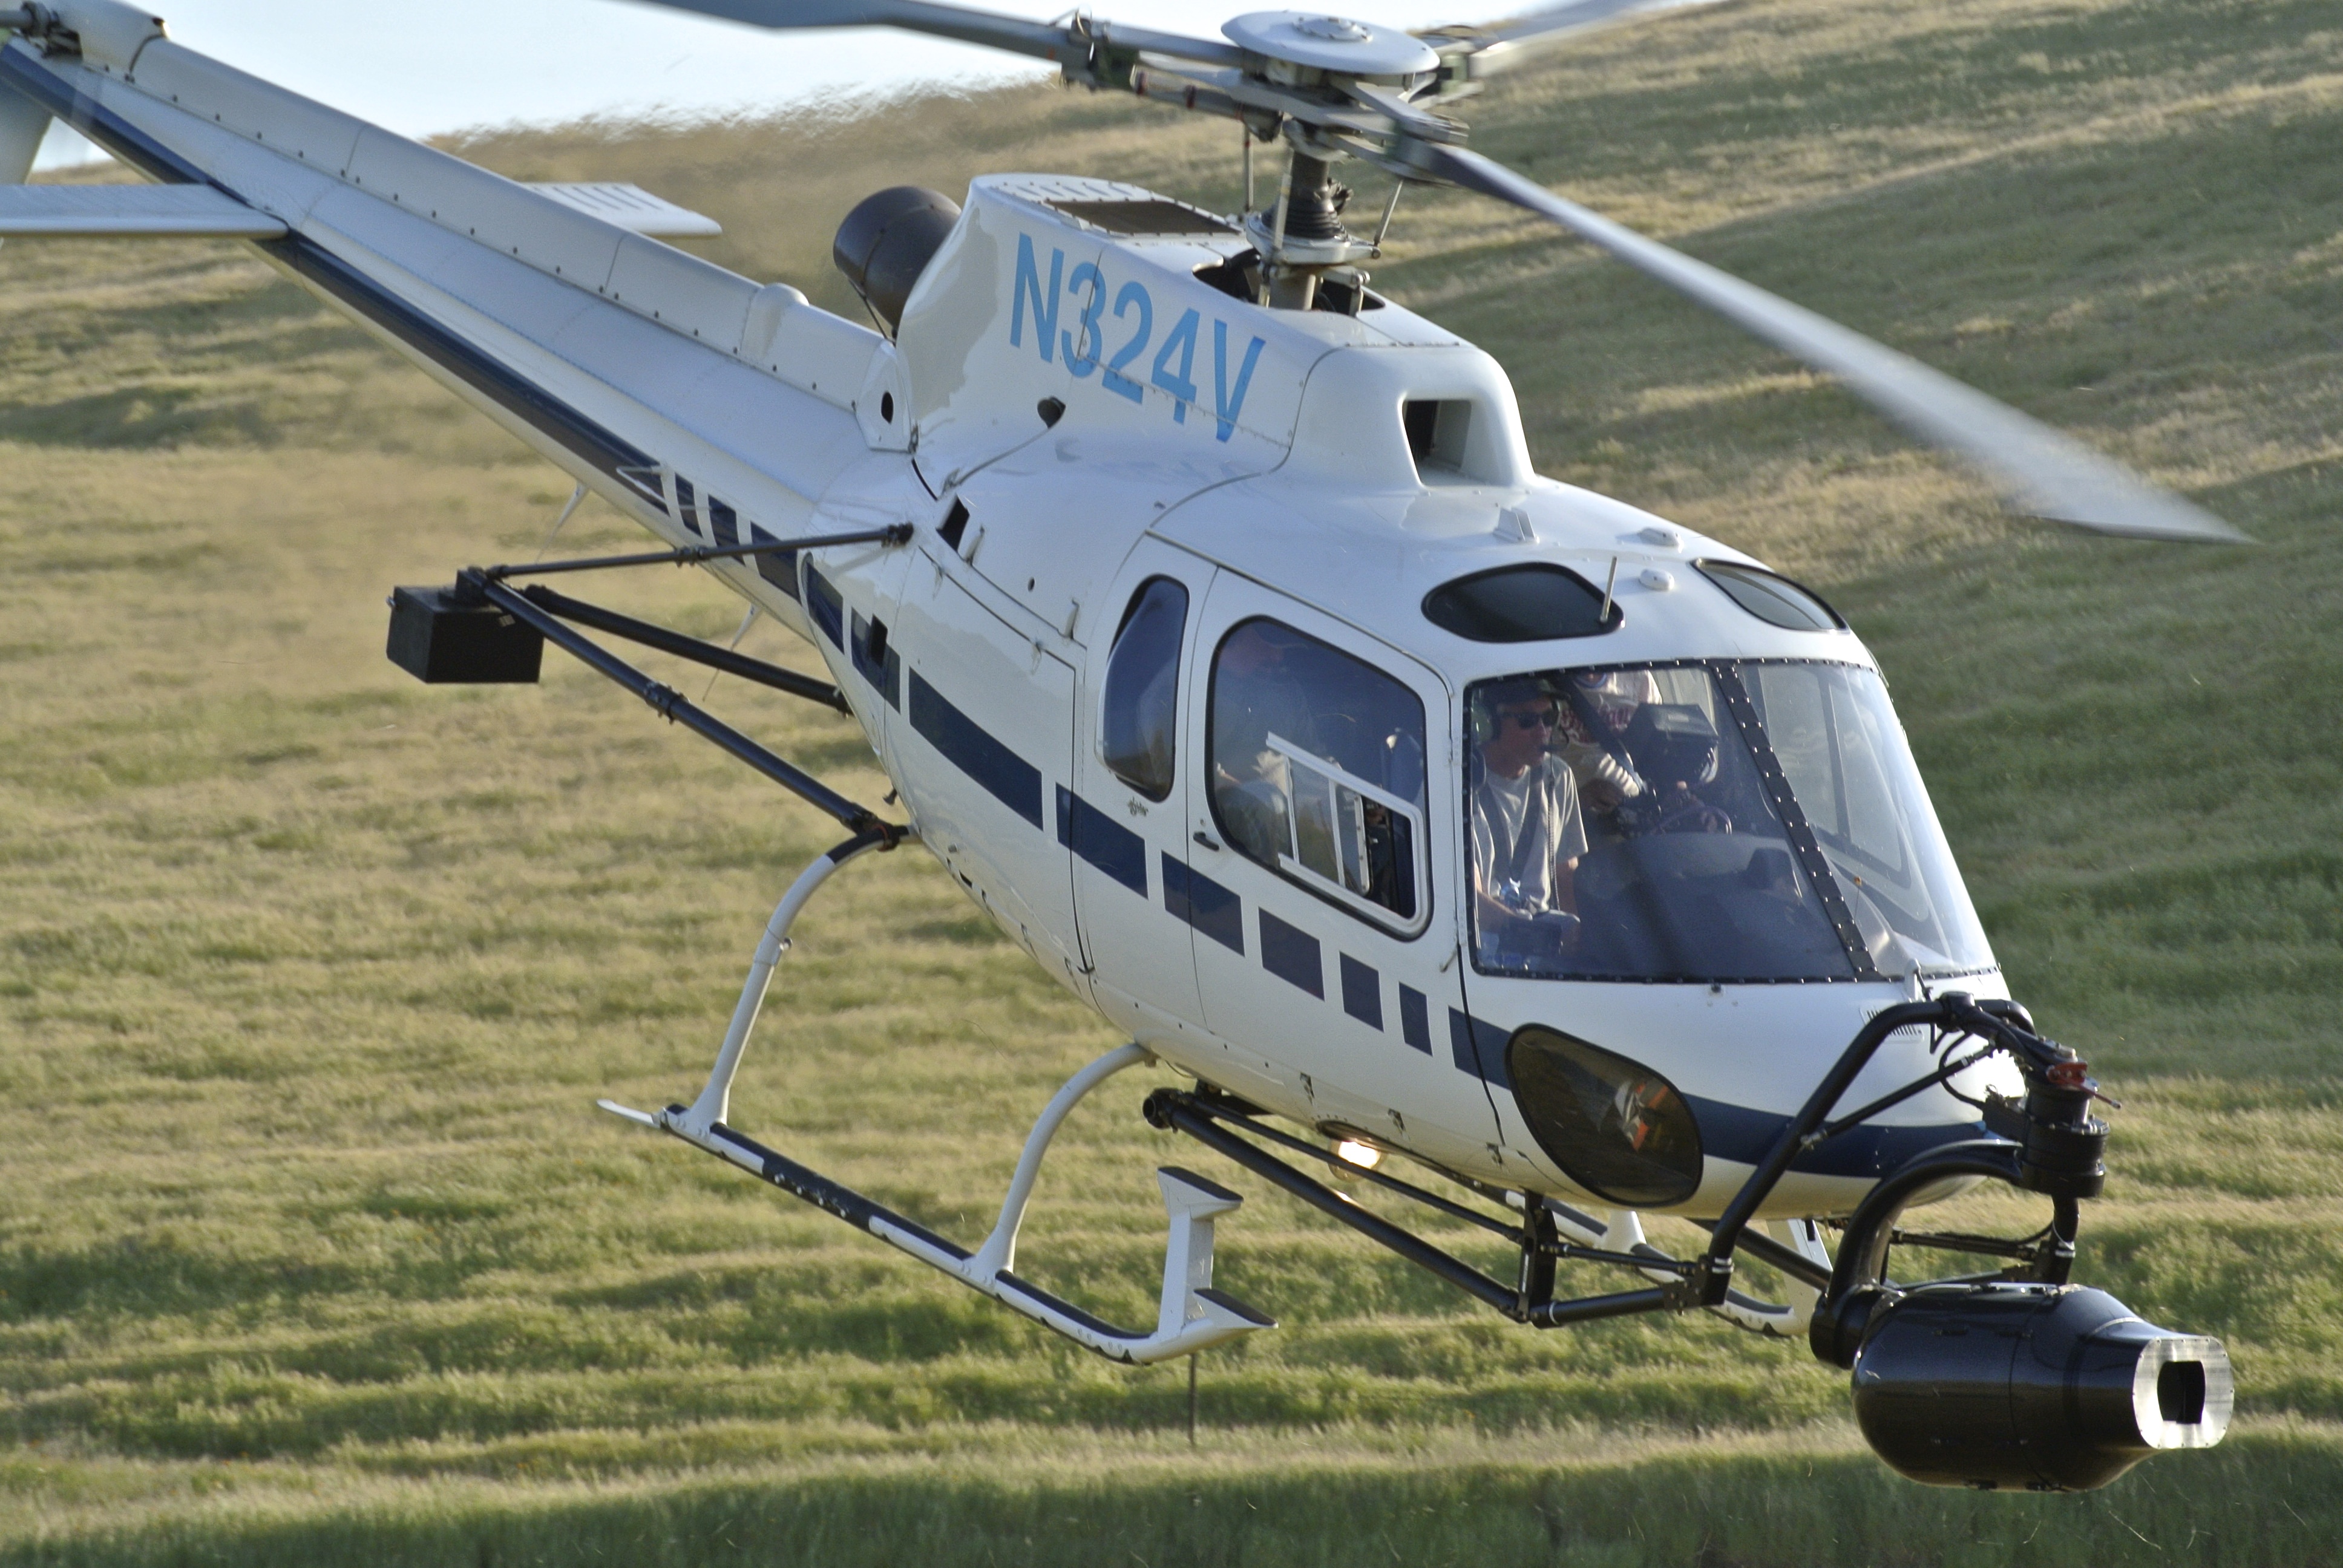 Using the Shotover K1 on a Mercedes shoot